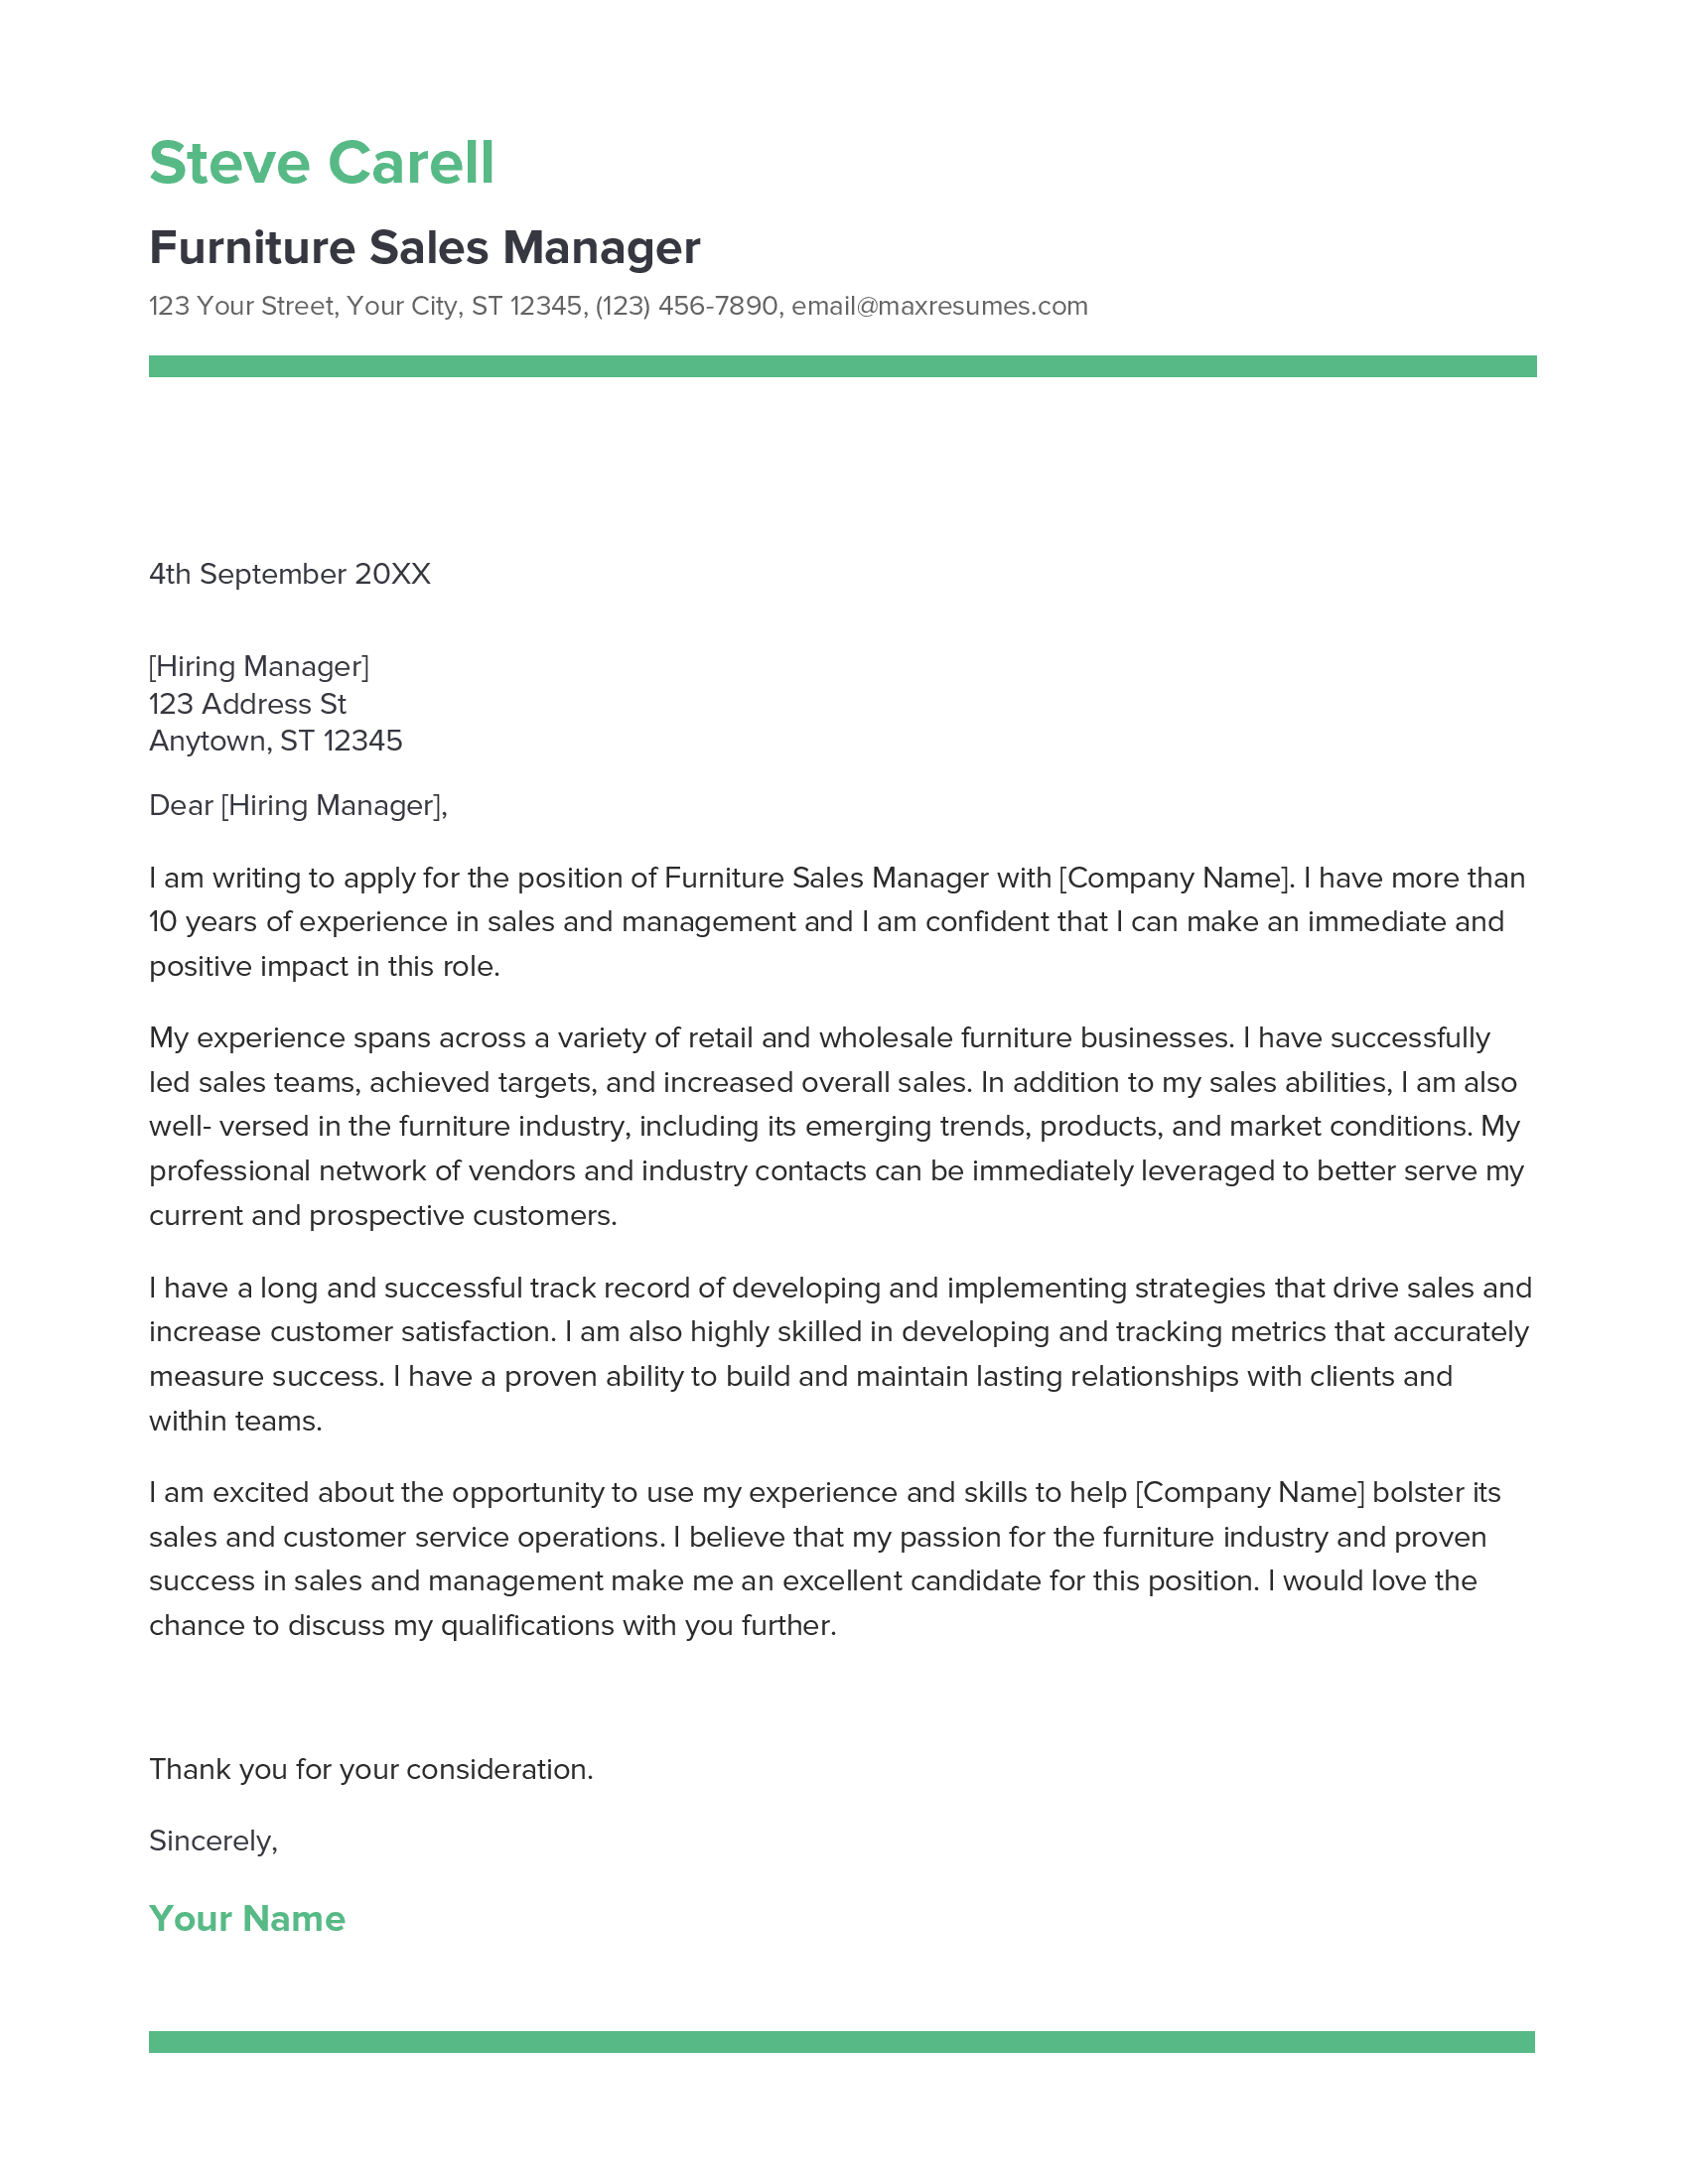 Furniture Sales Manager Cover Letter Example